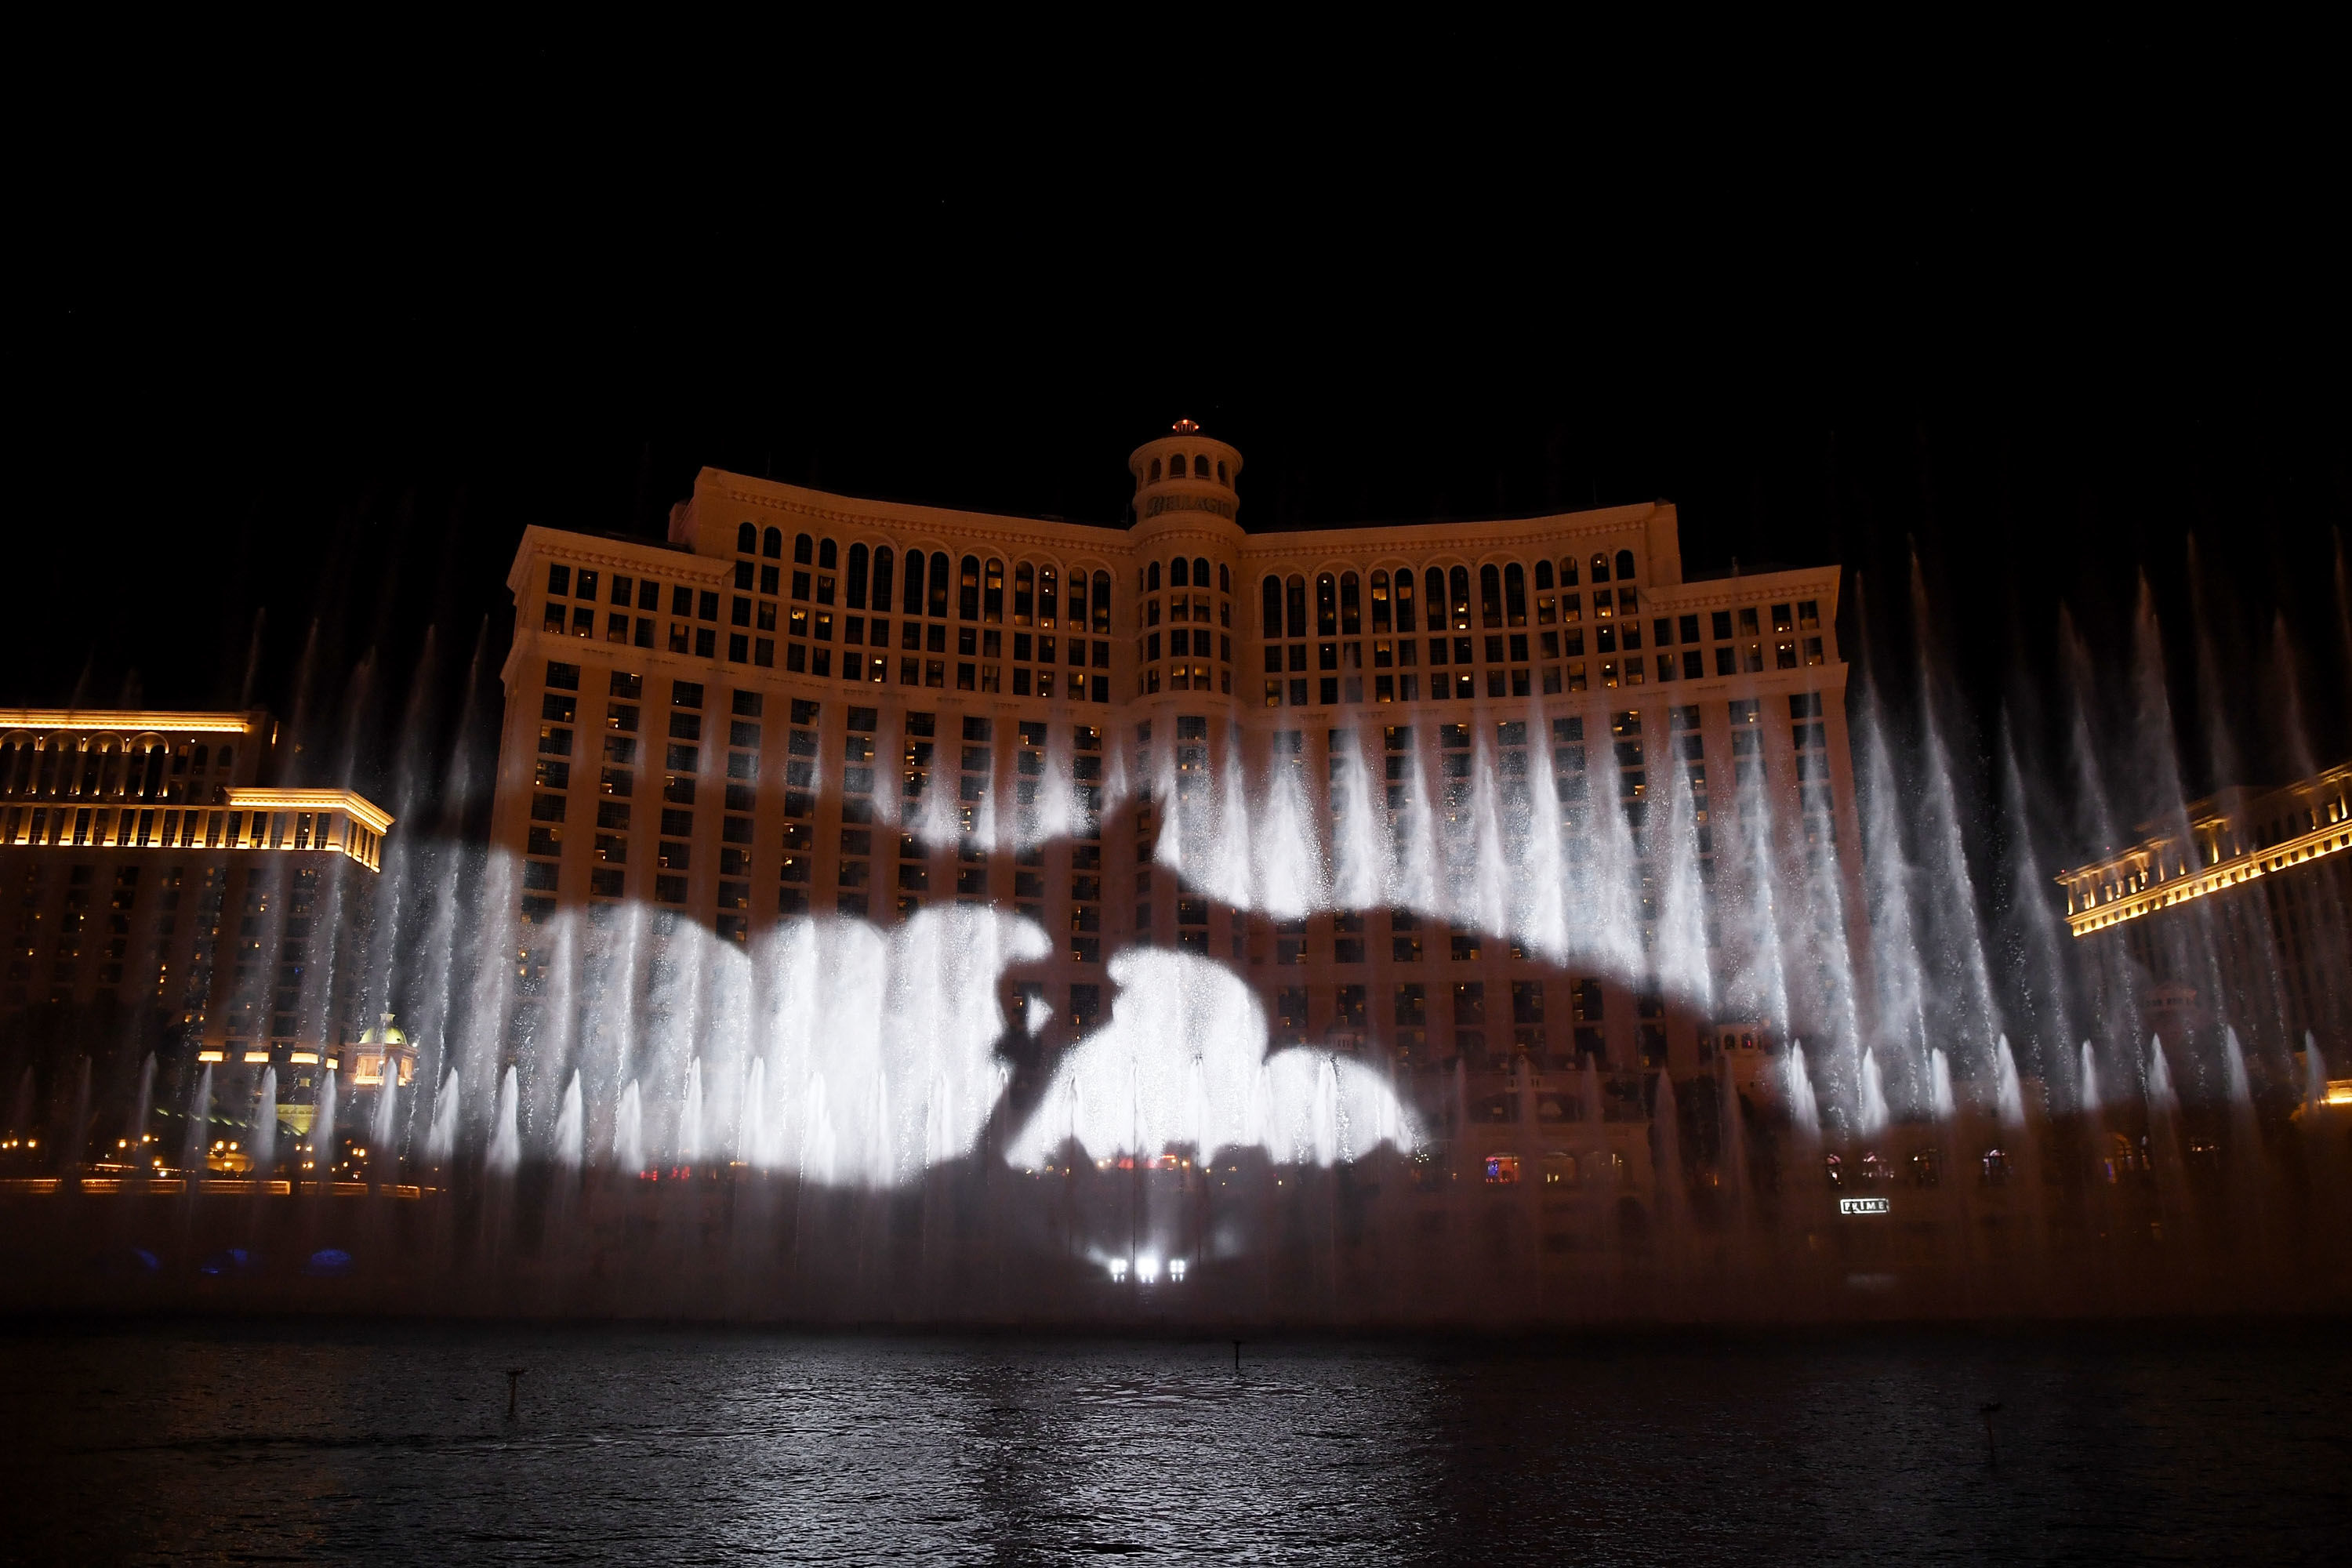 The Bellagio Hotel launches Game of Thrones fountain experience